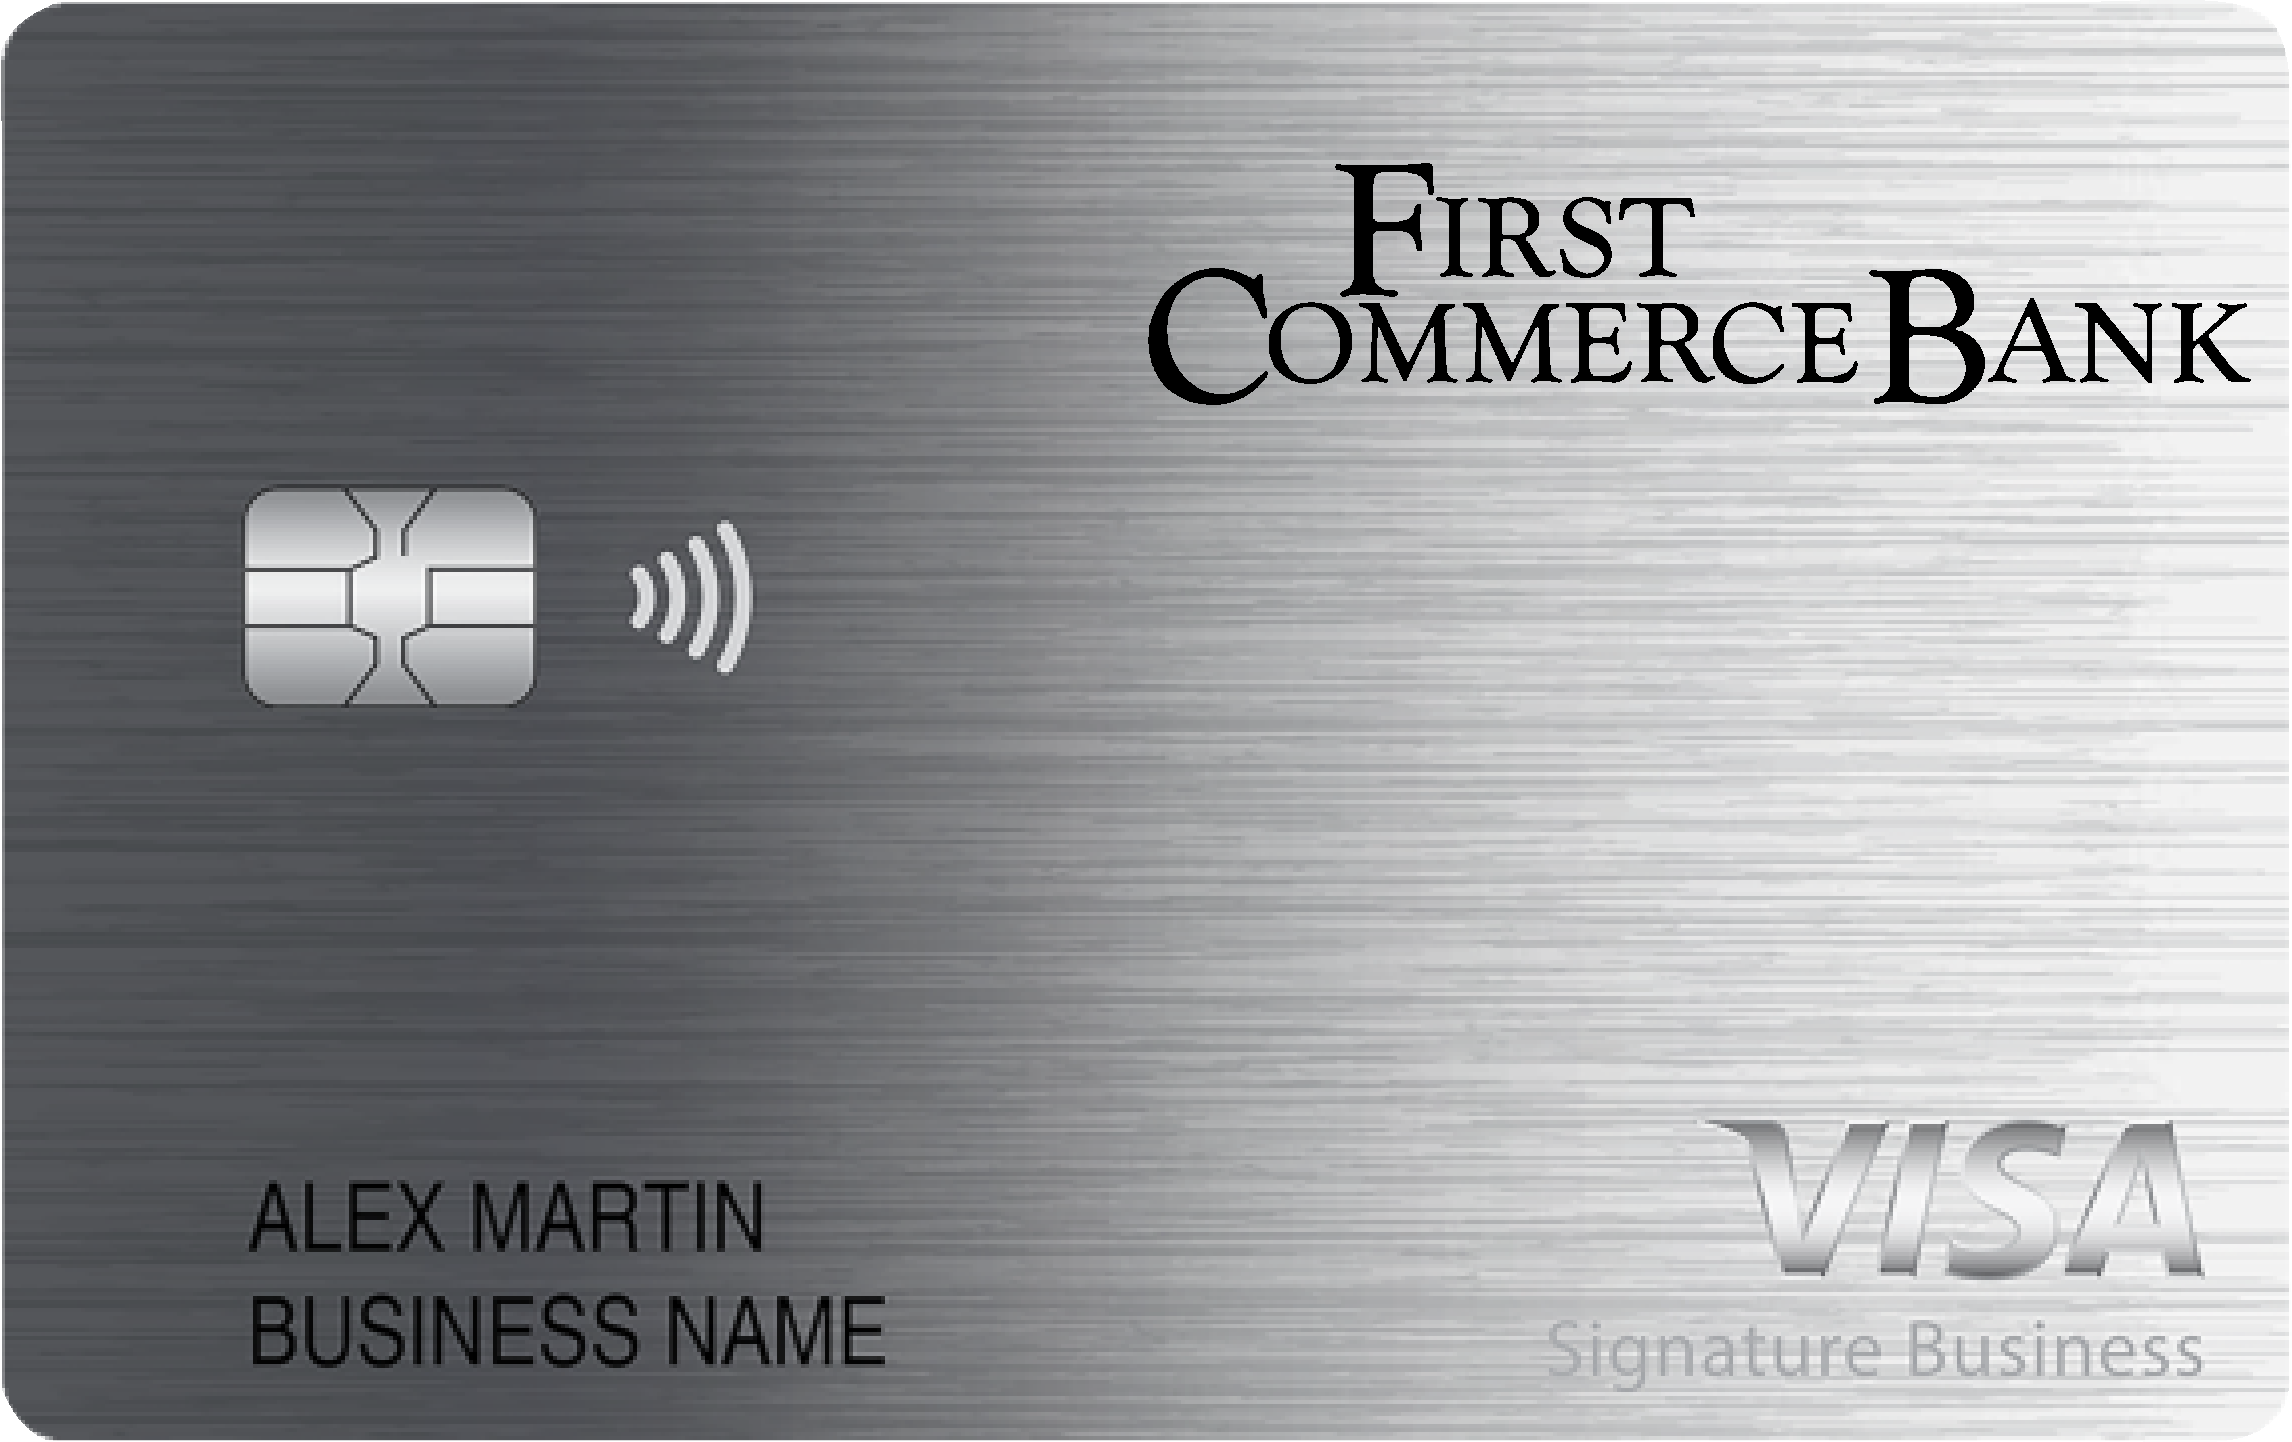 First Commerce Bank